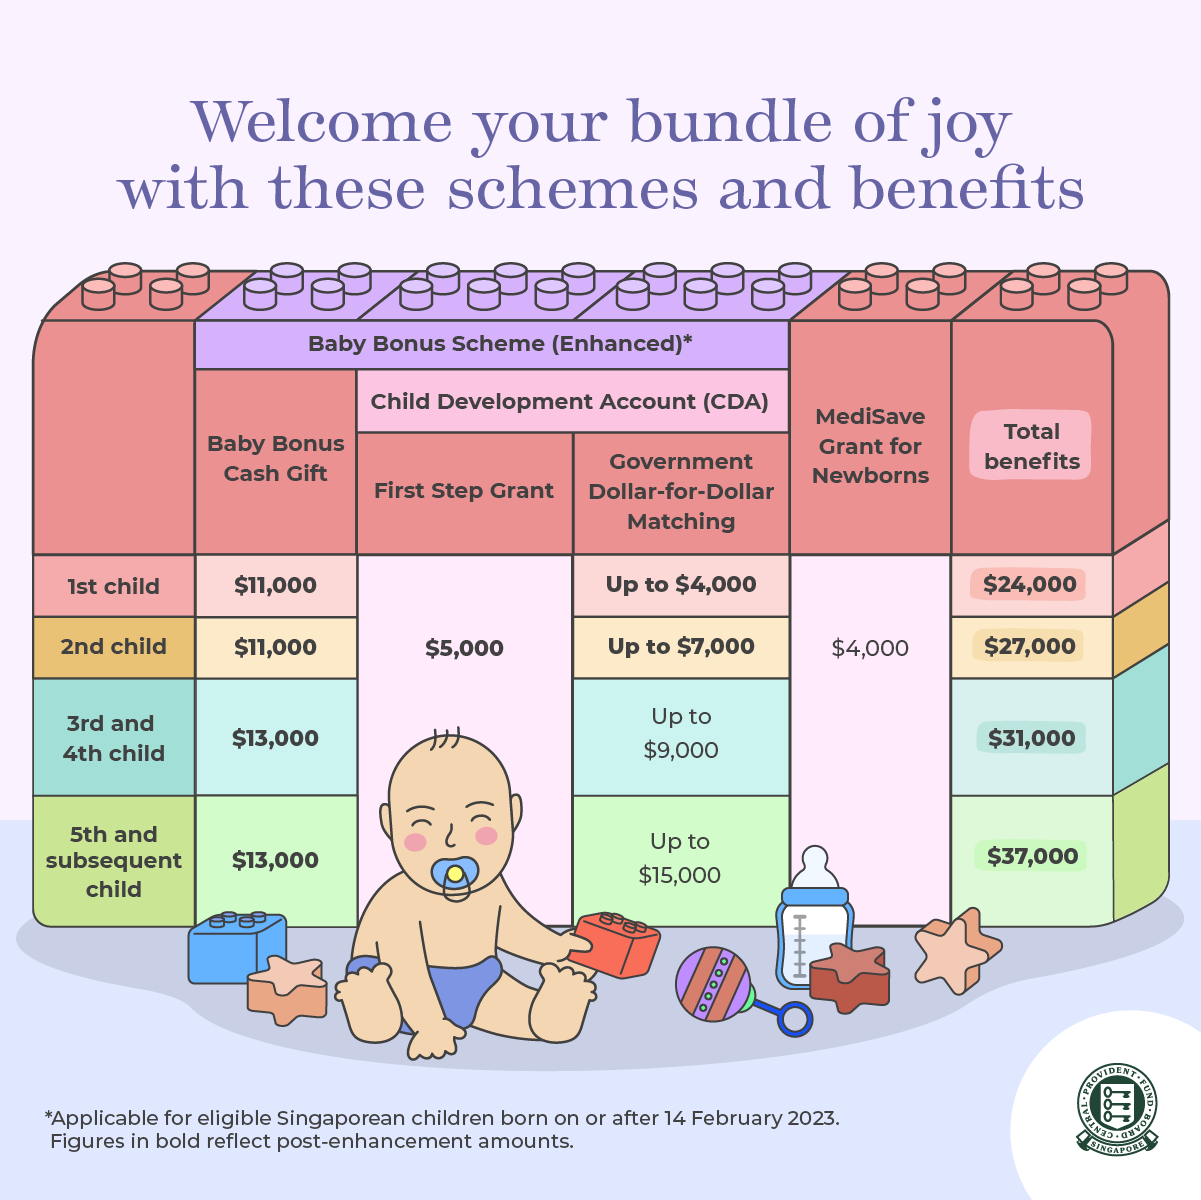 The total amount of benefits like the Baby Bonus cash gift, Child Development Account and MediSave Grant for your children